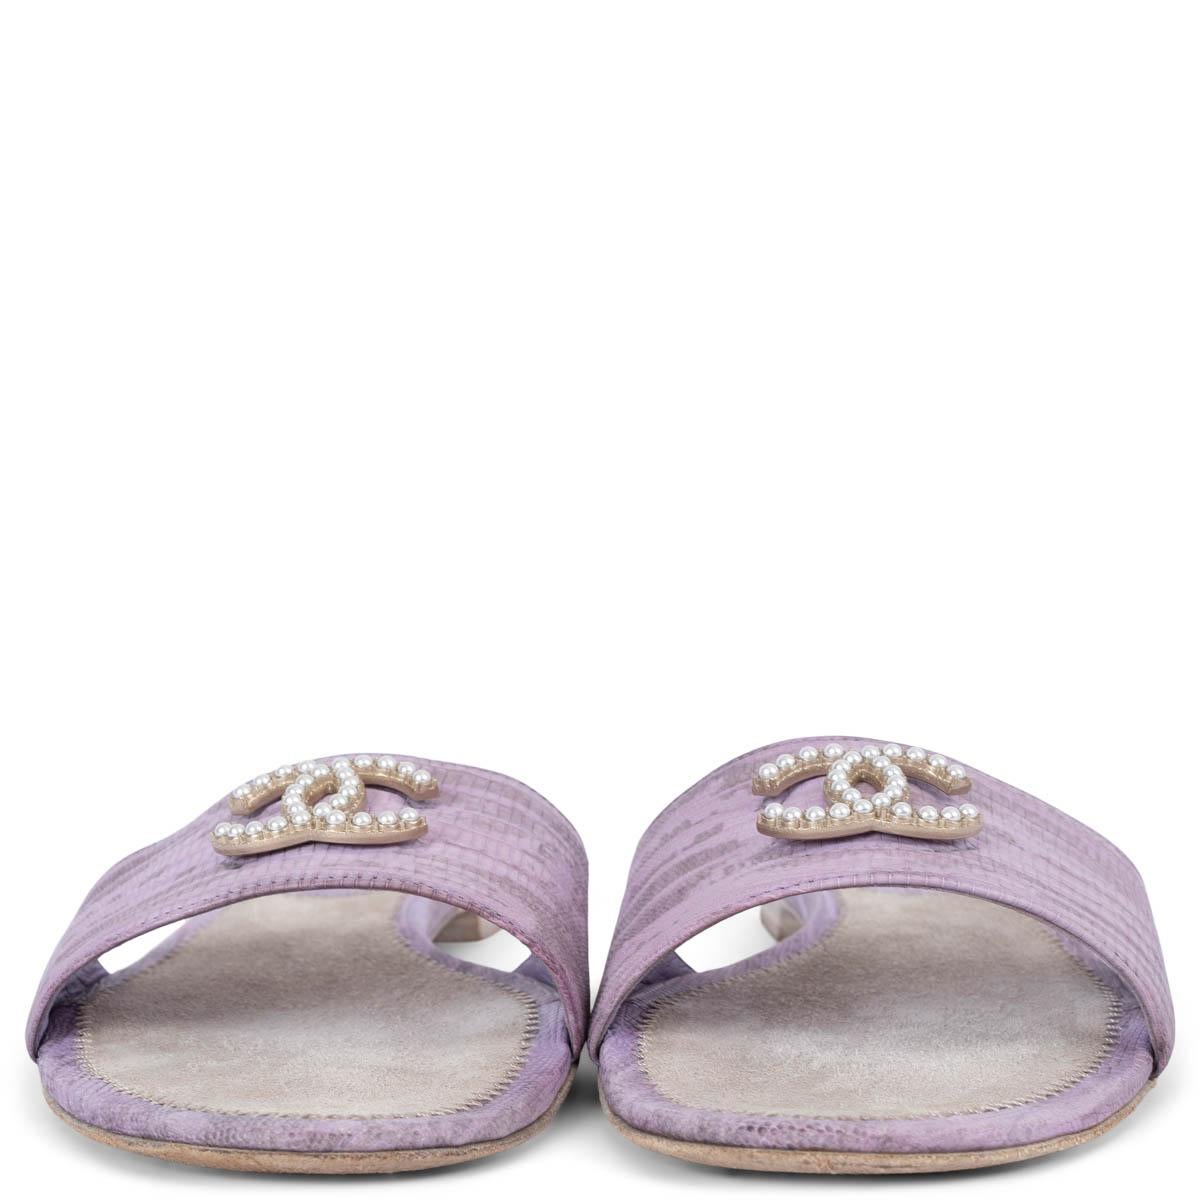 100% authentic Chanel slide sandals in lilac lizard. Features pearl embellished CC logo and grey suede footbeds. Have been worn and are in excellent condition. 

Measurements
Model	13C G28942
Imprinted Size	38
Shoe Size	38
Inside Sole	25cm